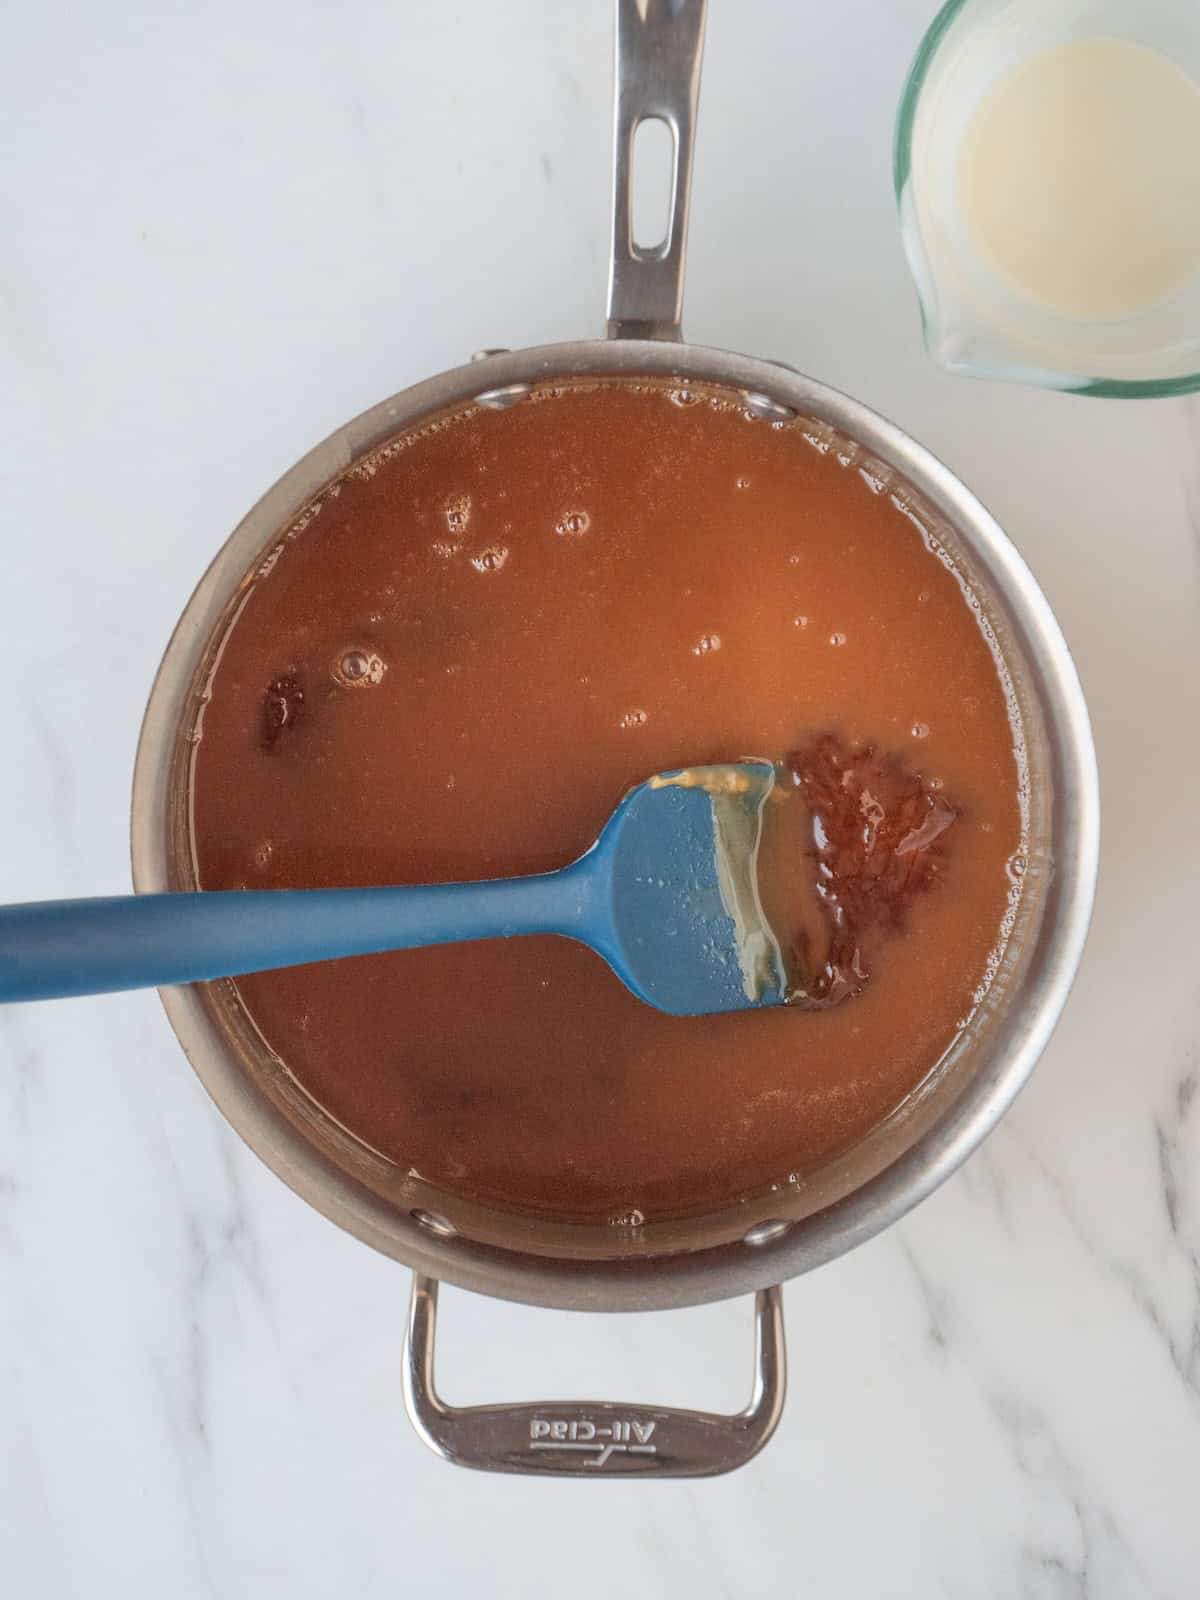 A saucepan with sugar and water heated together till it reaches a deep amber color, and cream added to make caramel sauce.